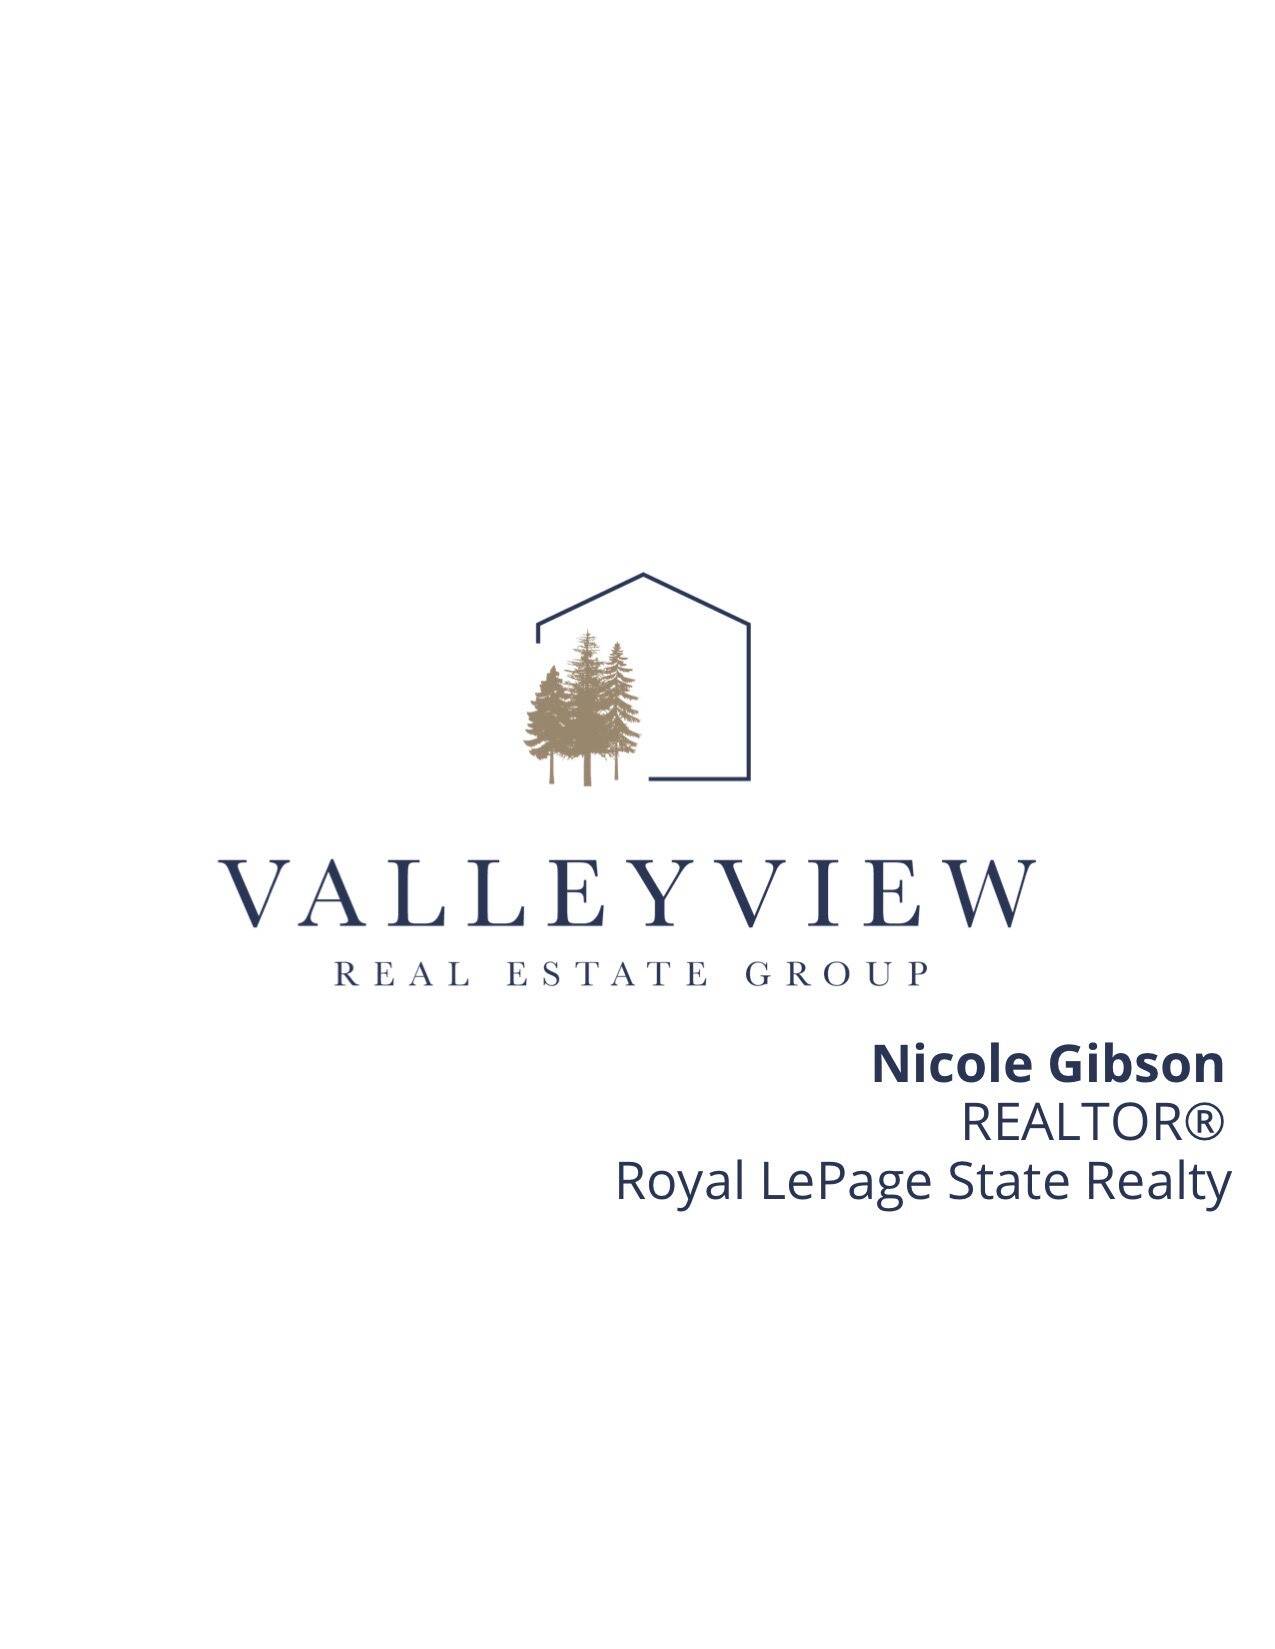 Valleyview Real Estate Group